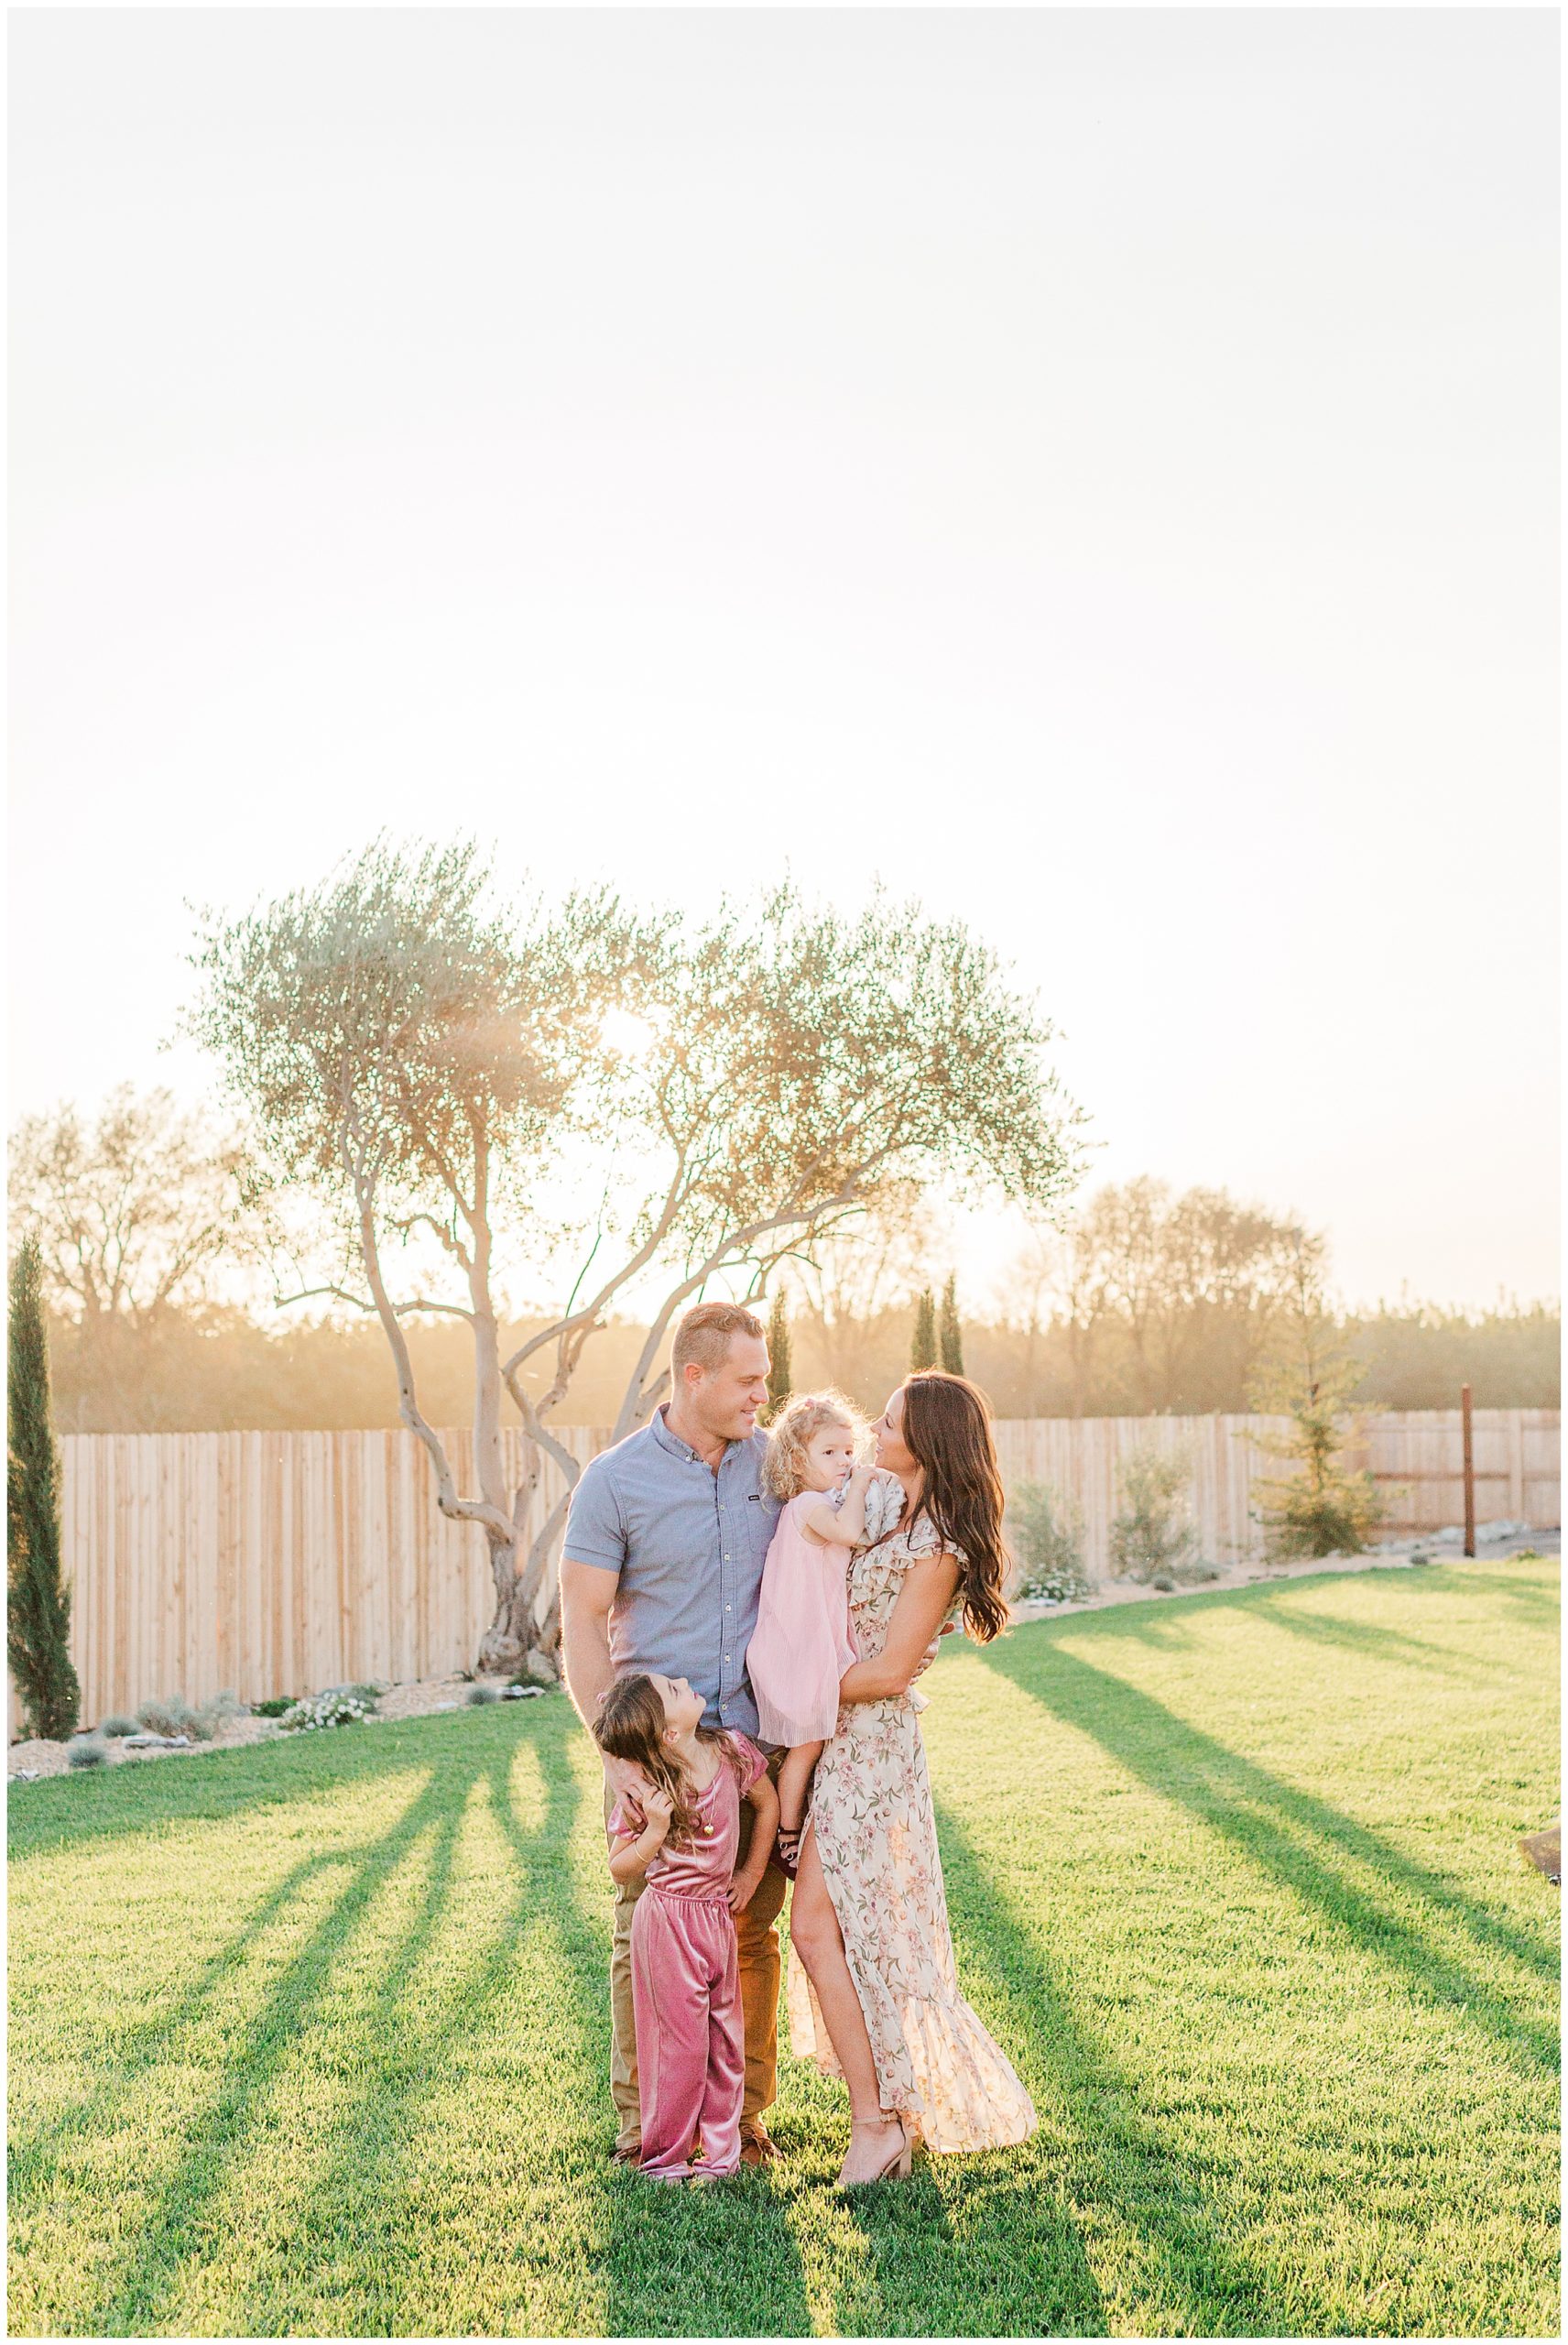 Family Pictures in Back Yard with Olive Tree | Ashley + Dane